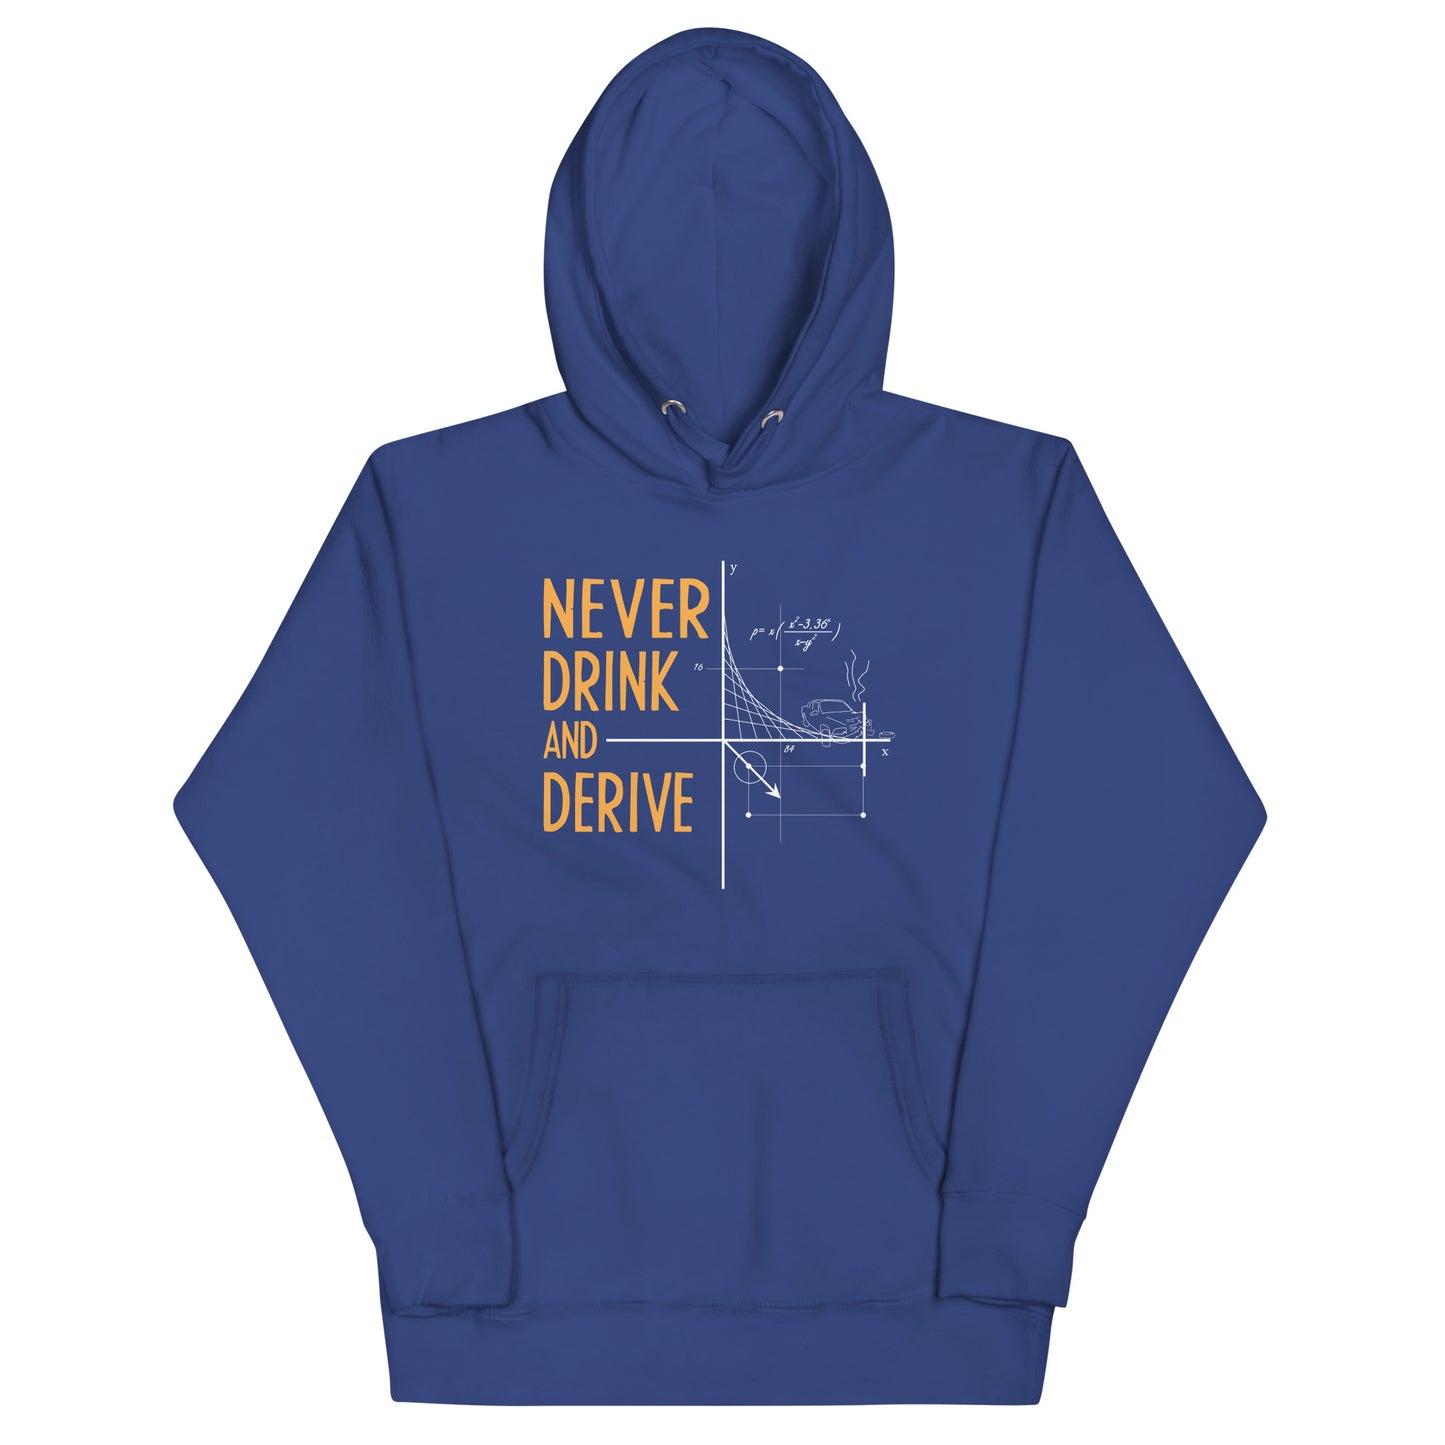 Never Drink and Derive Unisex Hoodie